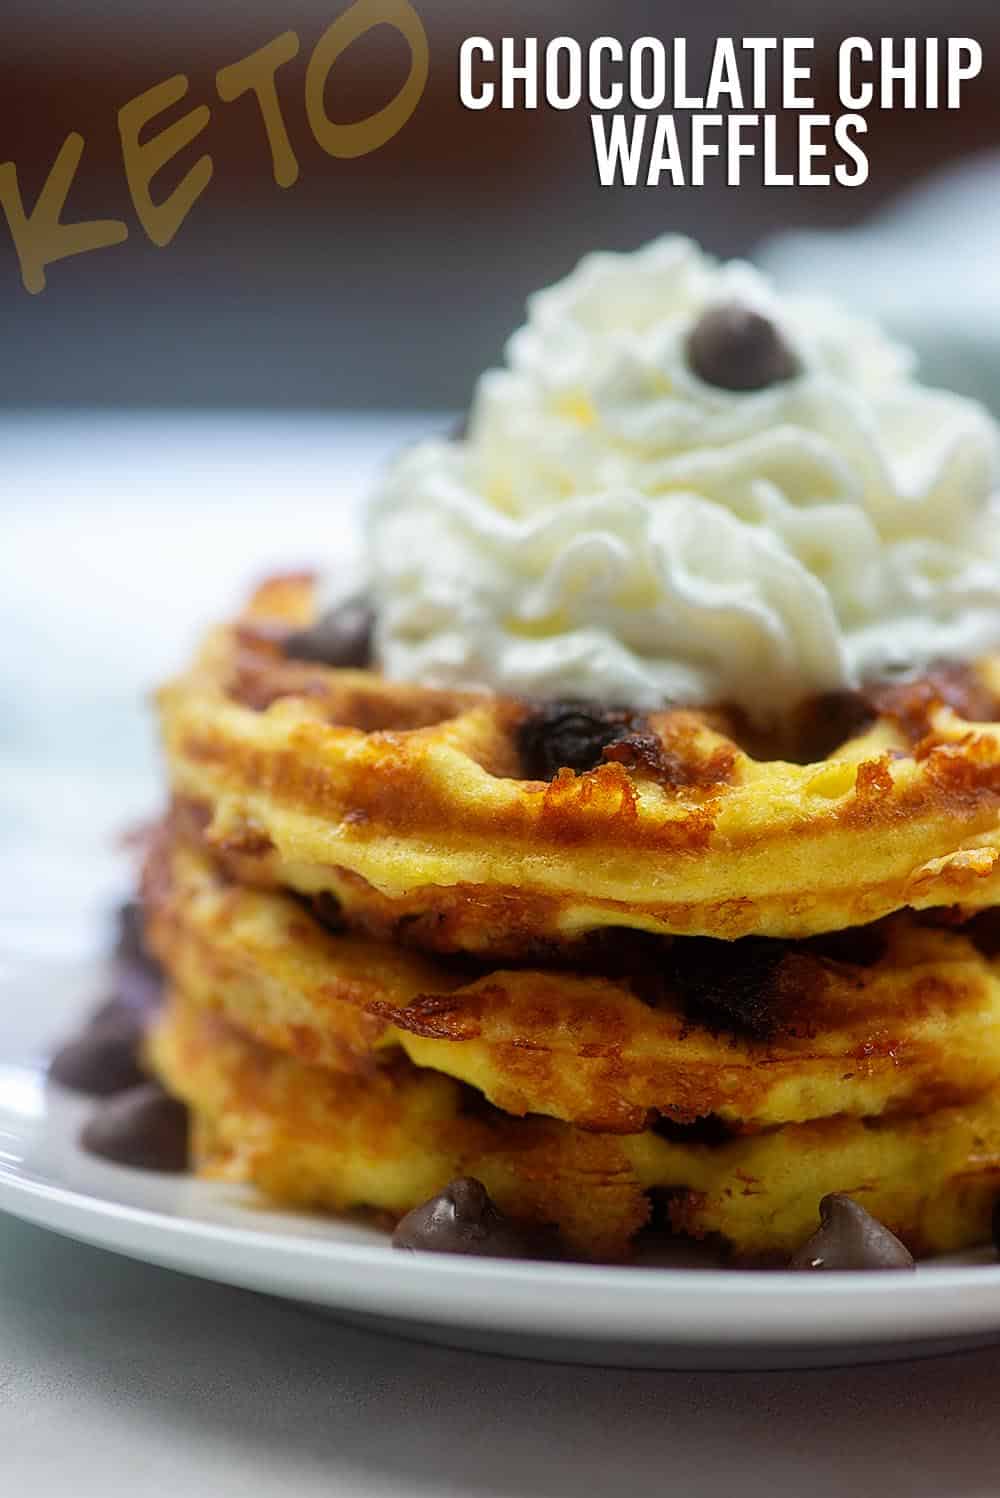 3 low carb chocolate chip waffles